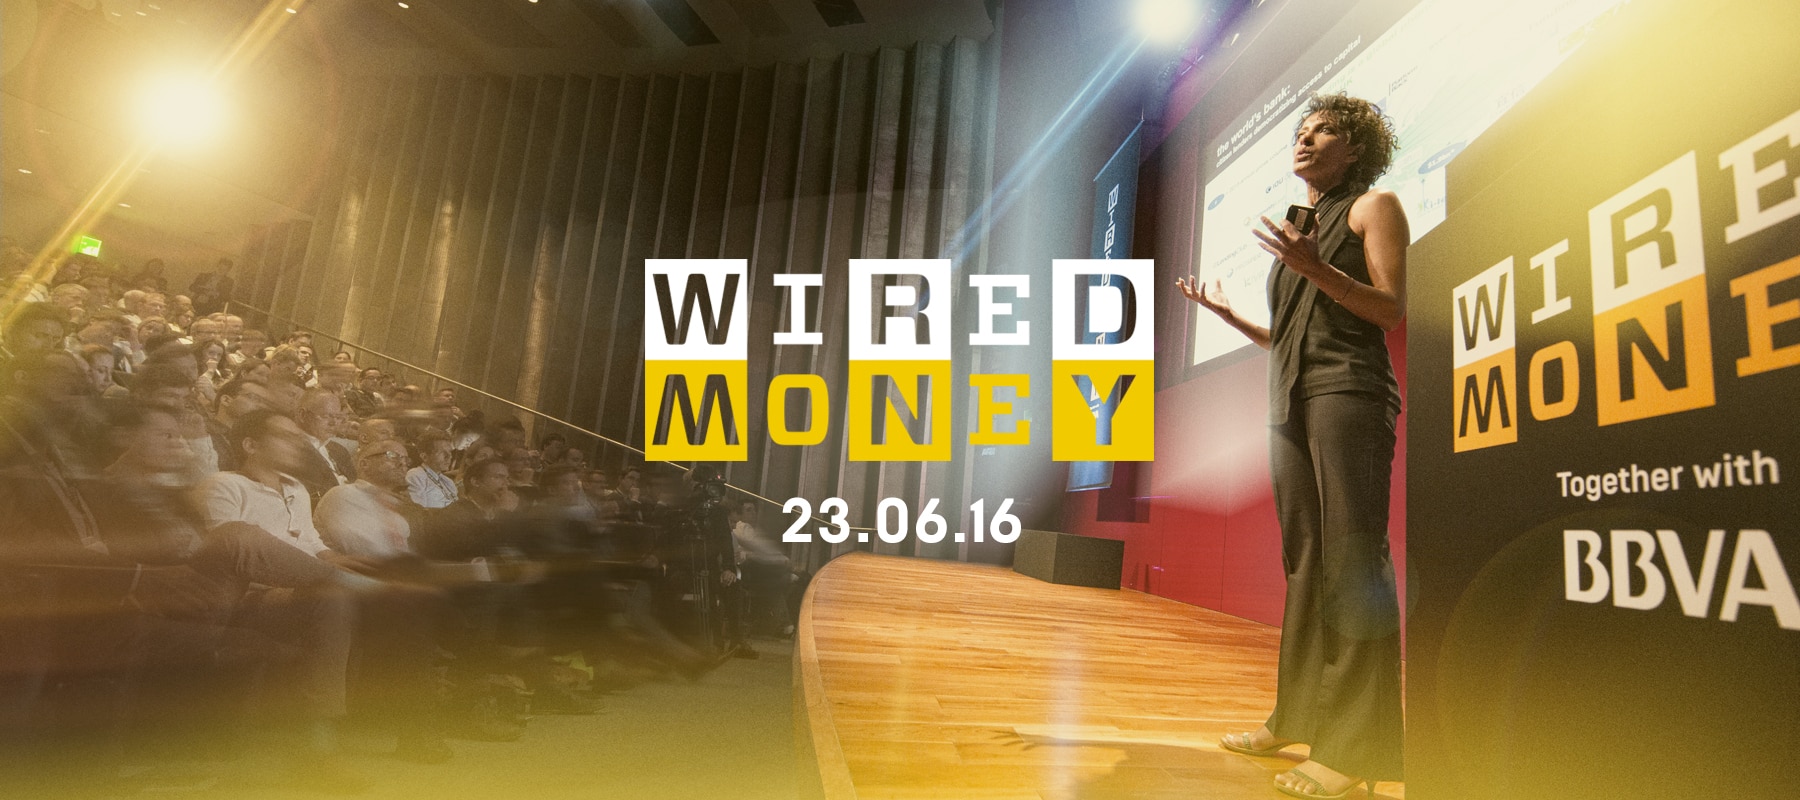 Wired Money Together with BBVA